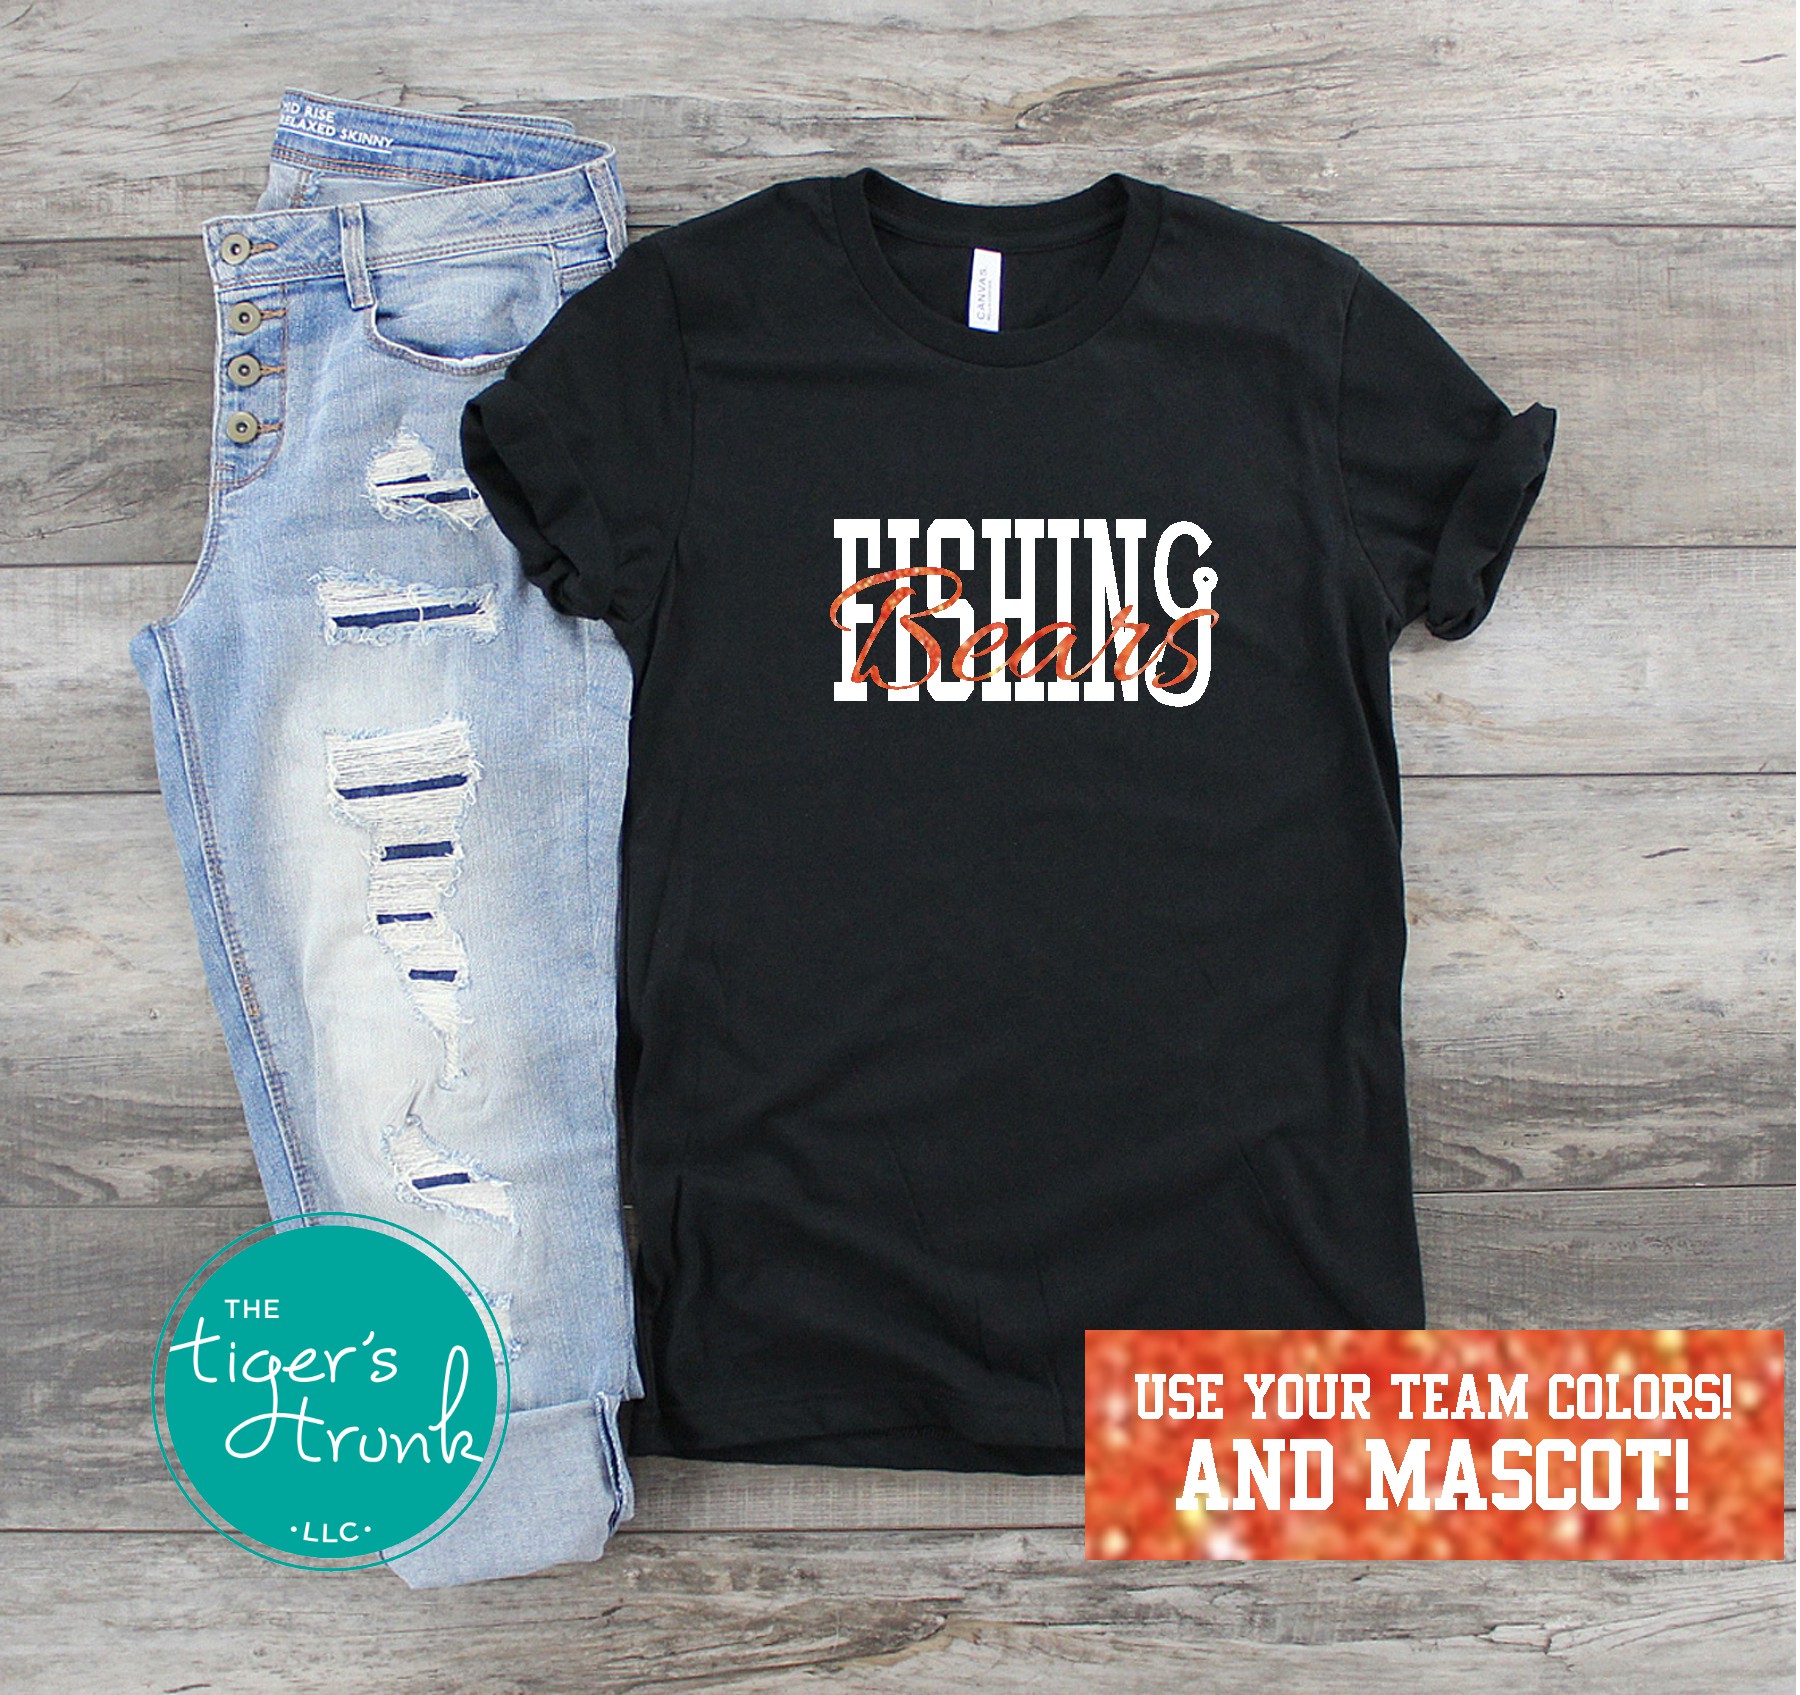 Handmade Personalized Fishing Shirt in School Colors, Fishing Gifts for Fishing Tournament, Custom Fishing Team Shirt with Team Mascot, Fishing Mom